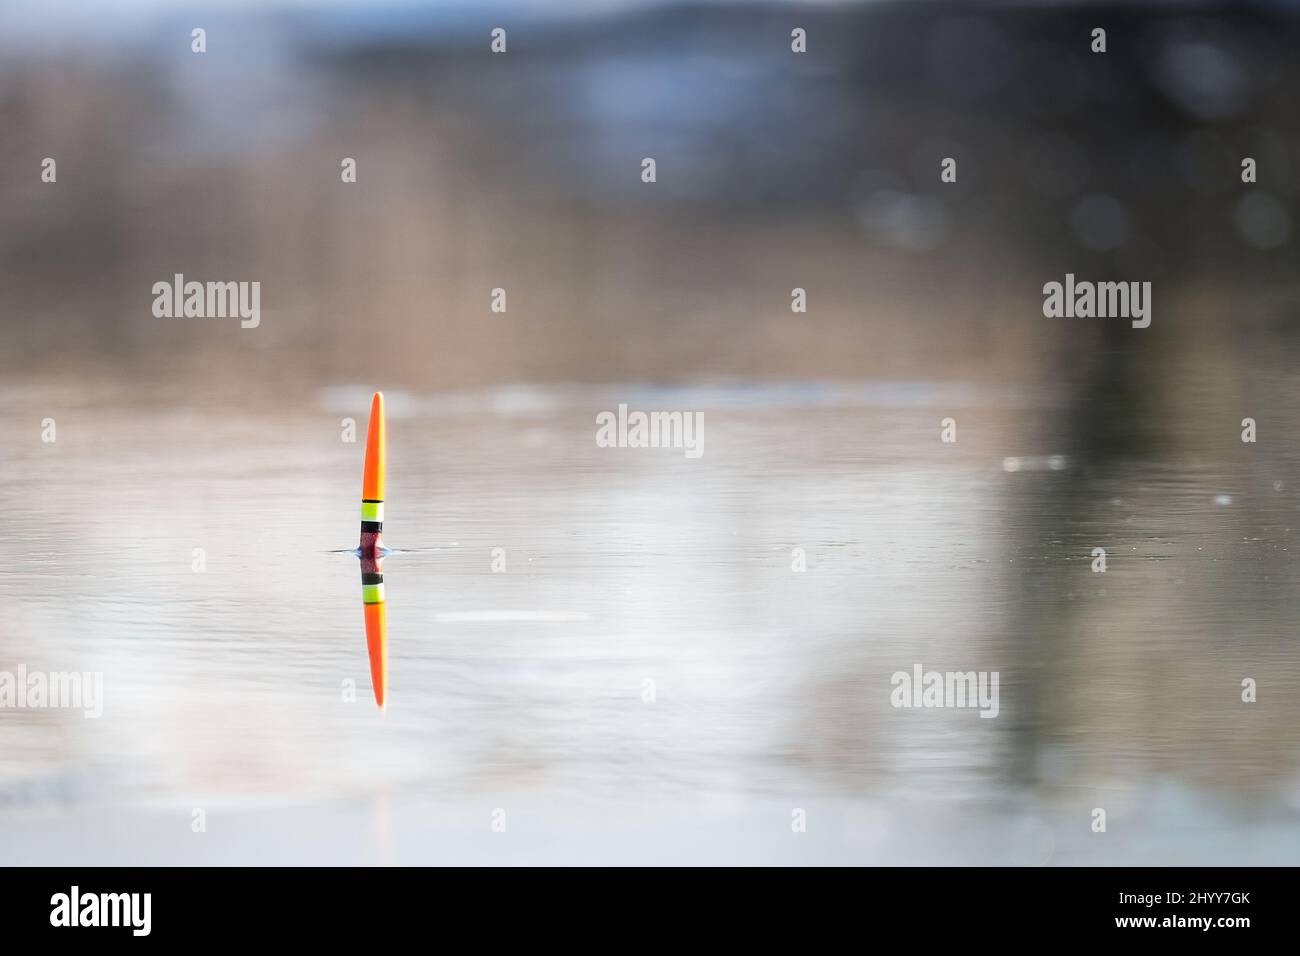 Orange-yellow fishing float in the river water. Spring fishing, bright colors of water and nature. Solar reflection in the water. Background image. Stock Photo